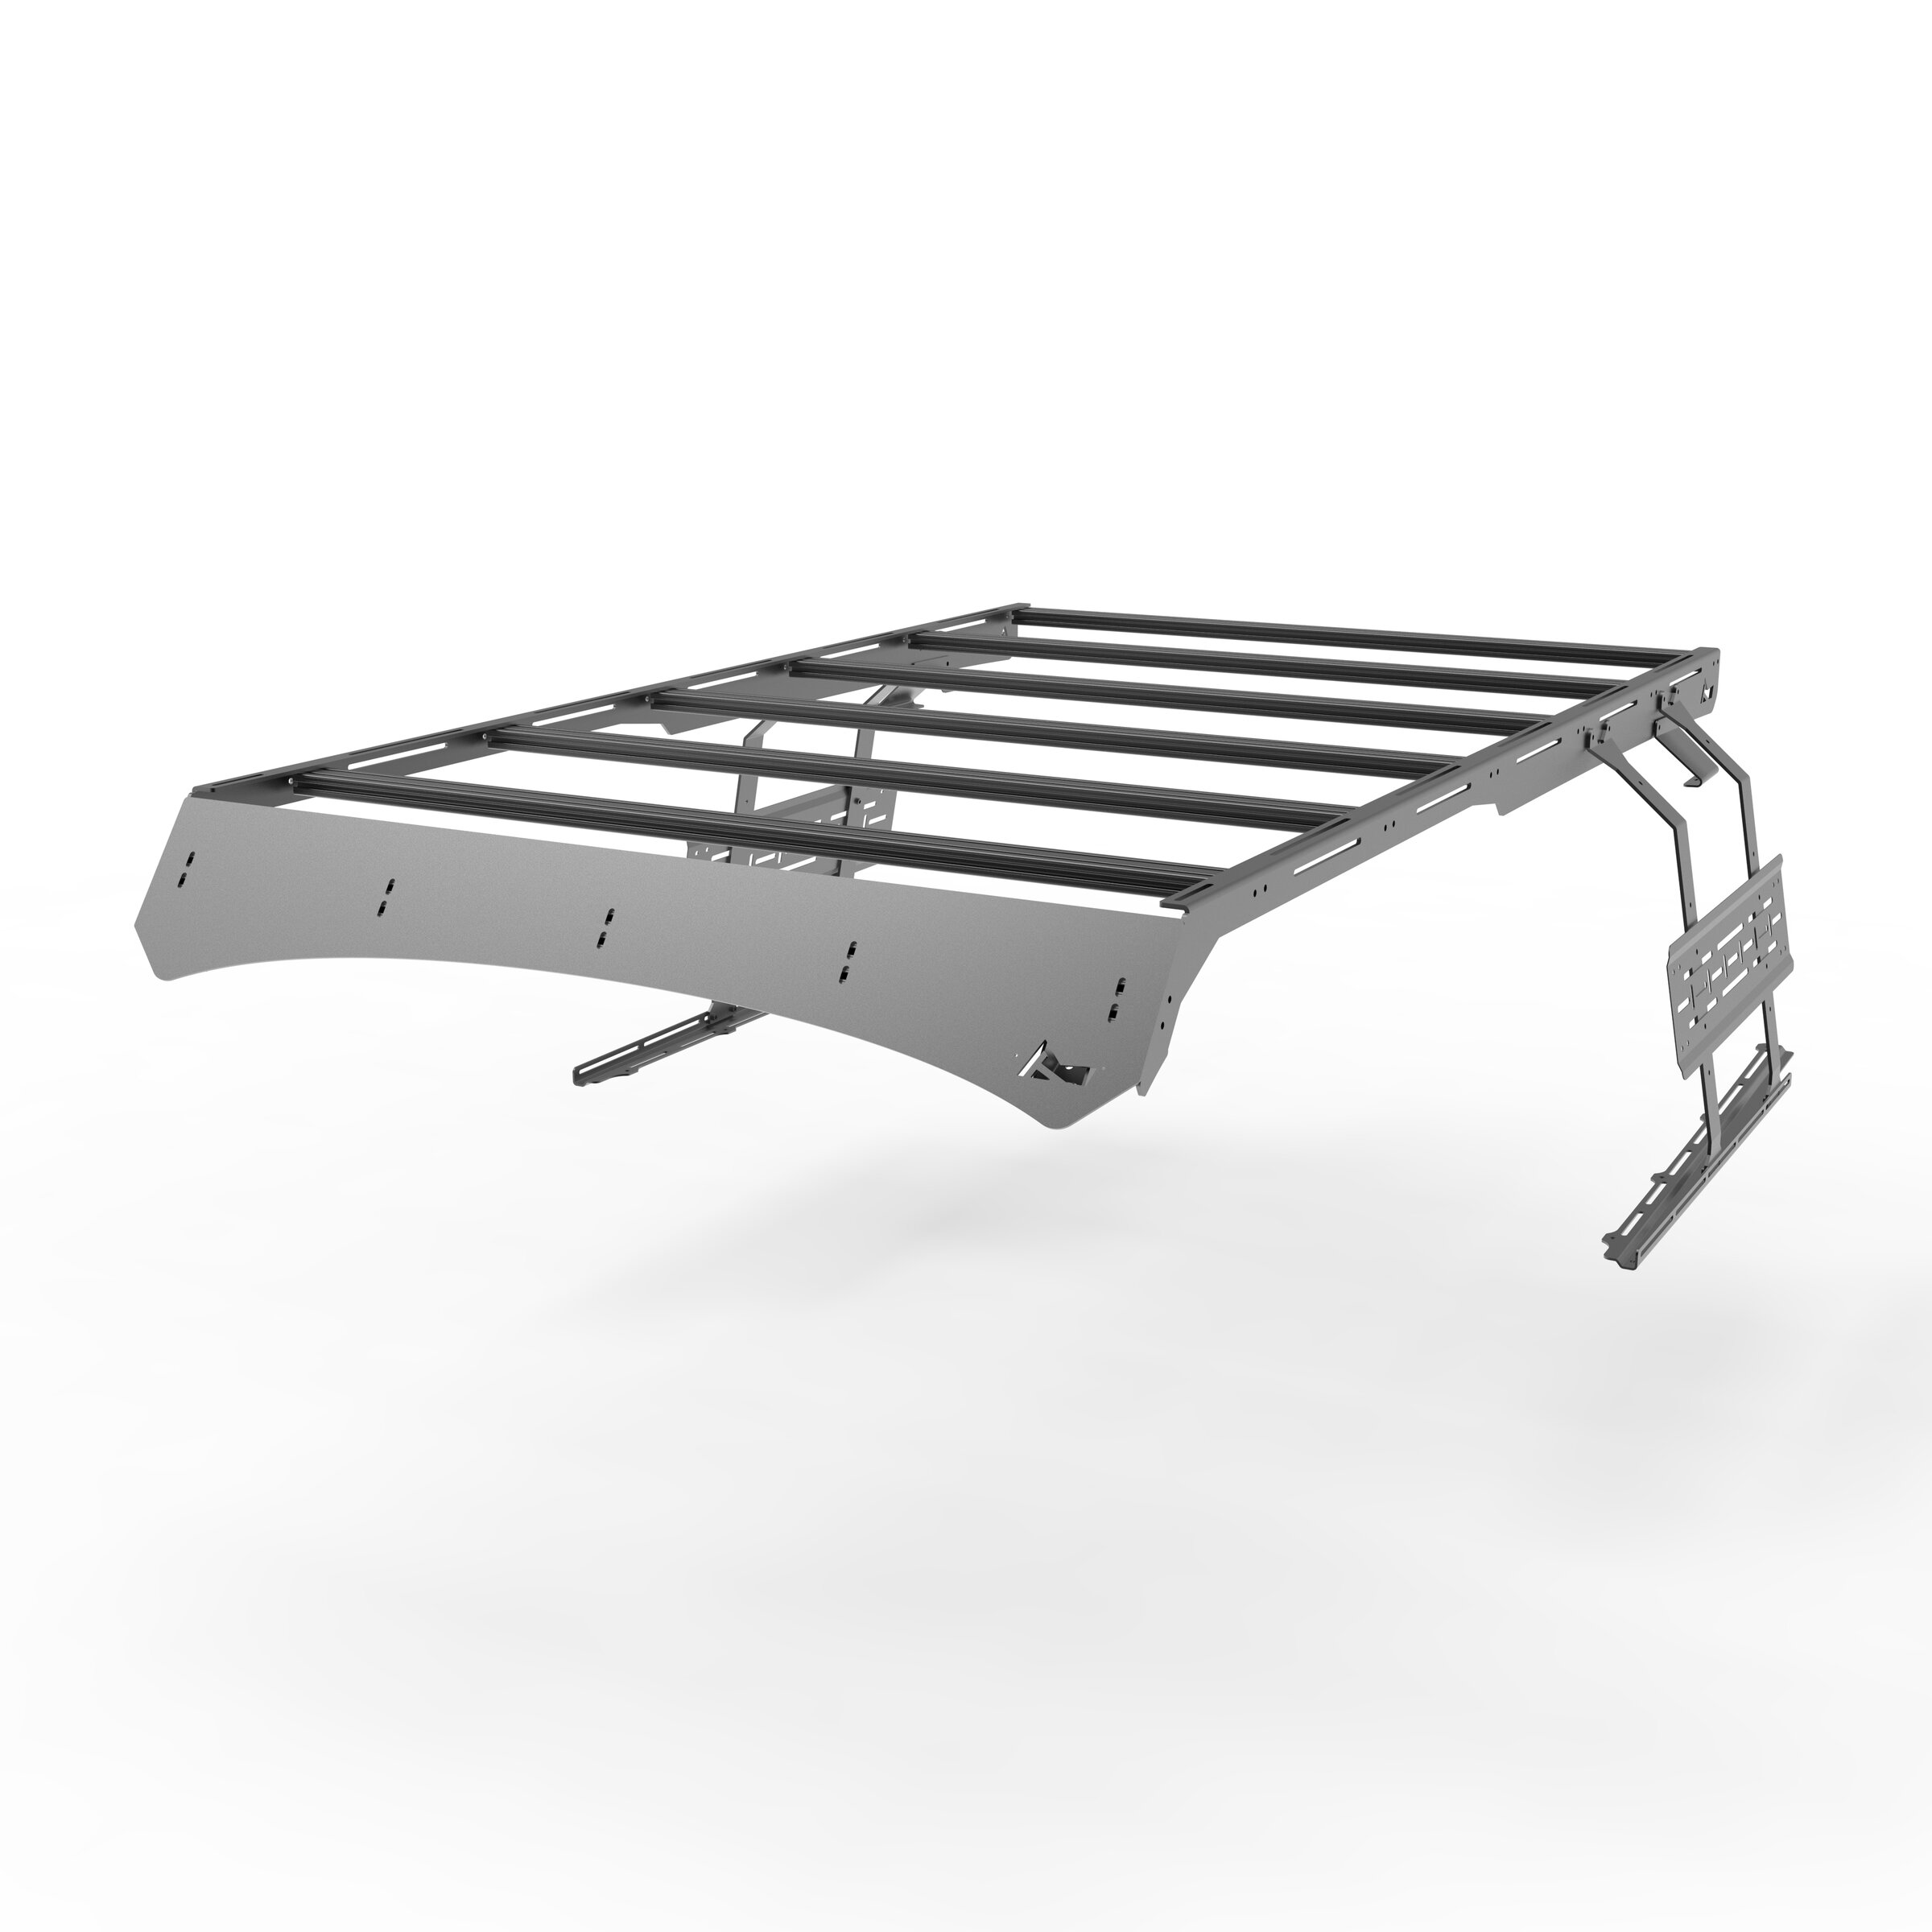 Ford Bronco TrailRax Modular Roof Rack For Your Bronco TR-FB-2D-MRR-FL-PR-40 front View.1